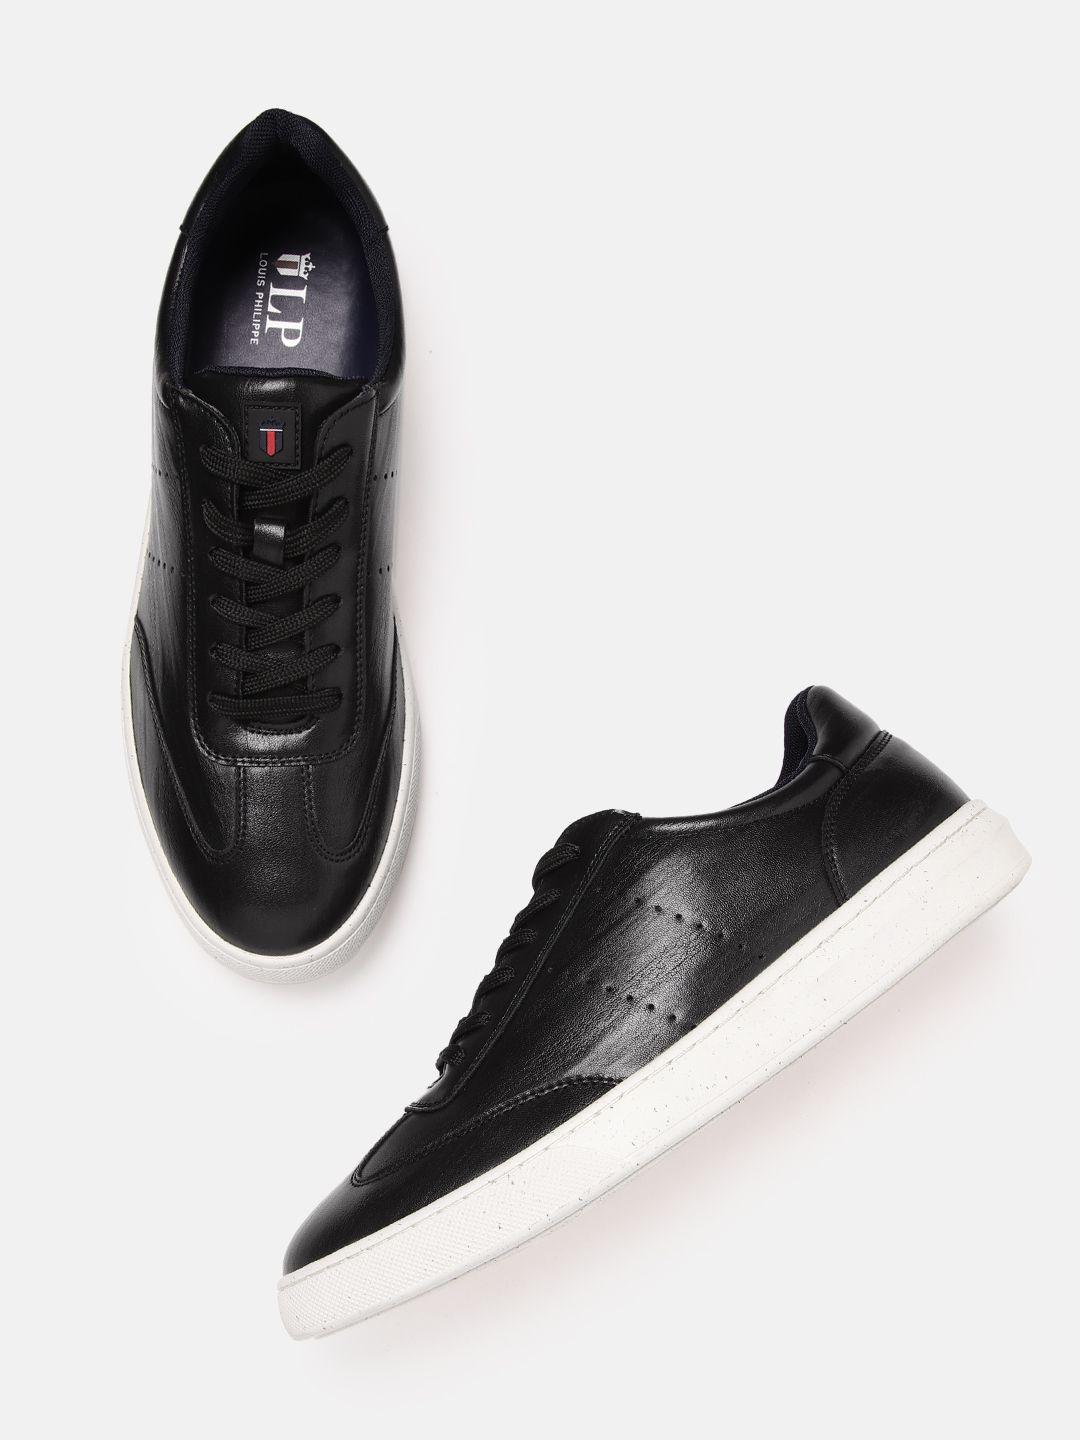 louis philippe men sneakers with perforation detail